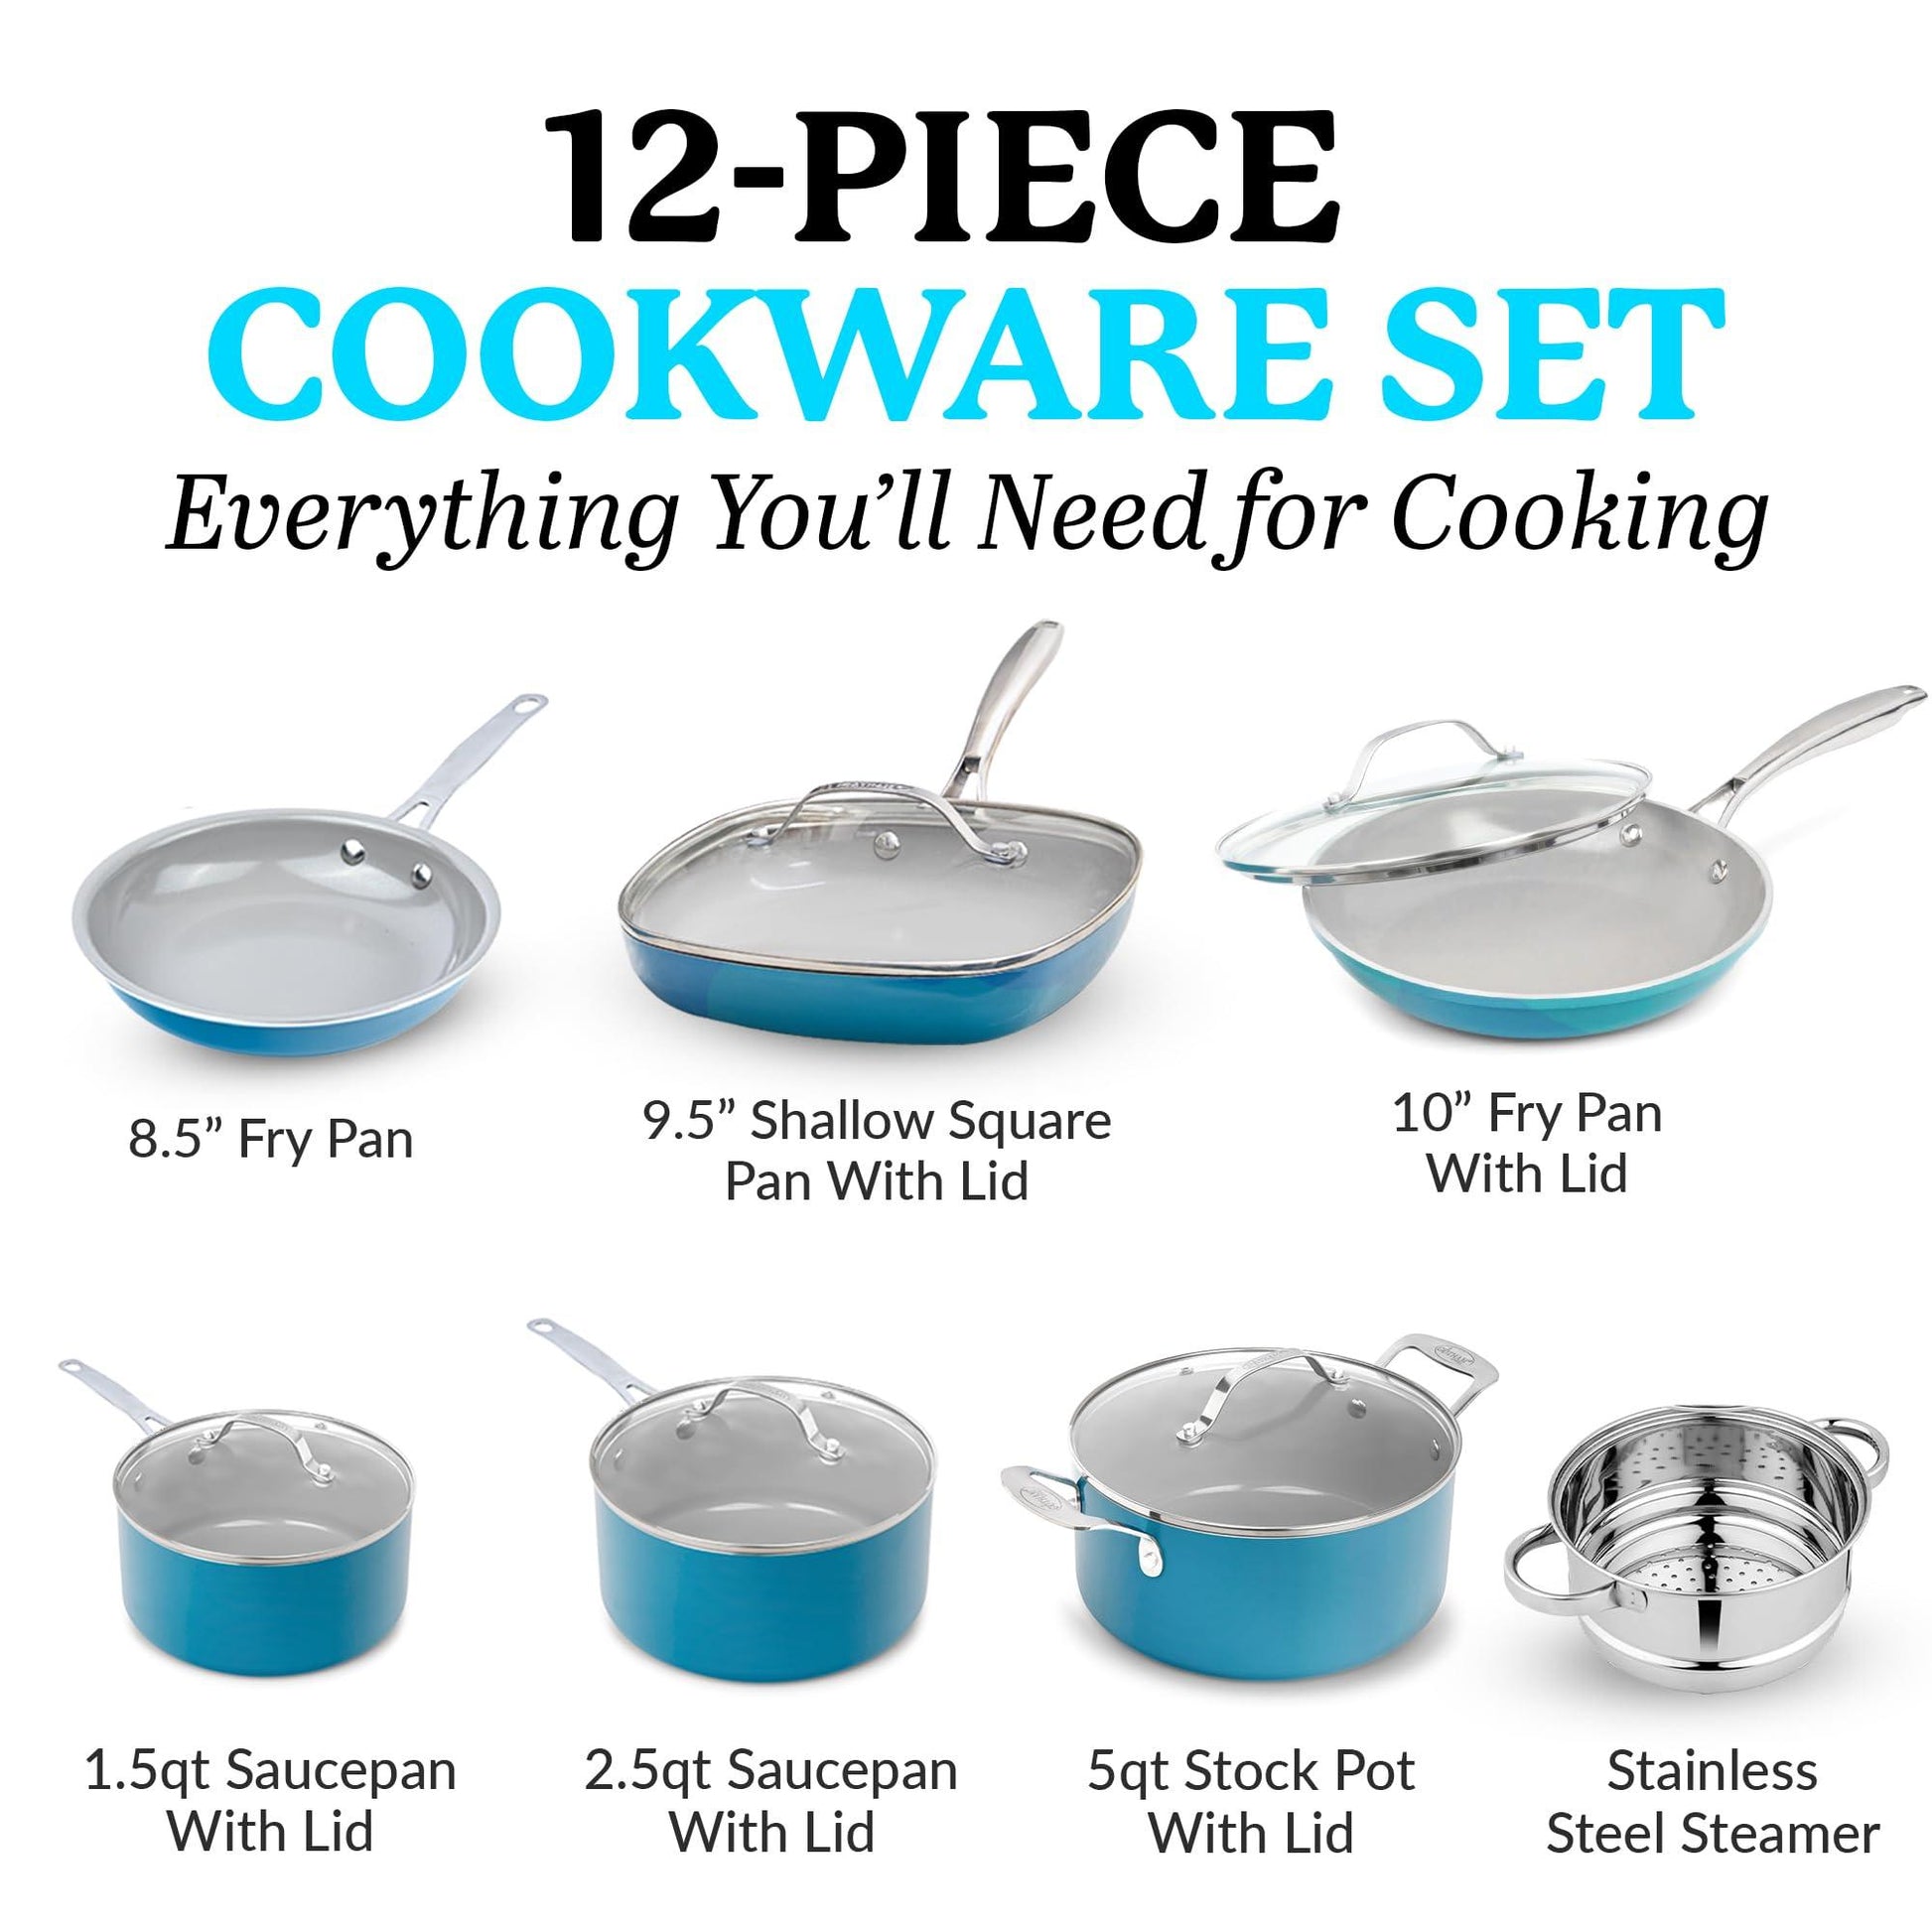 Gotham Steel Aqua Blue Pots and Pans Set, 12 Piece Nonstick Ceramic Cookware, Includes Frying Pans, Stockpots & Saucepans, Stay Cool Handles, Oven & Dishwasher Safe, 100% PFOA Free, Turquoise - CookCave